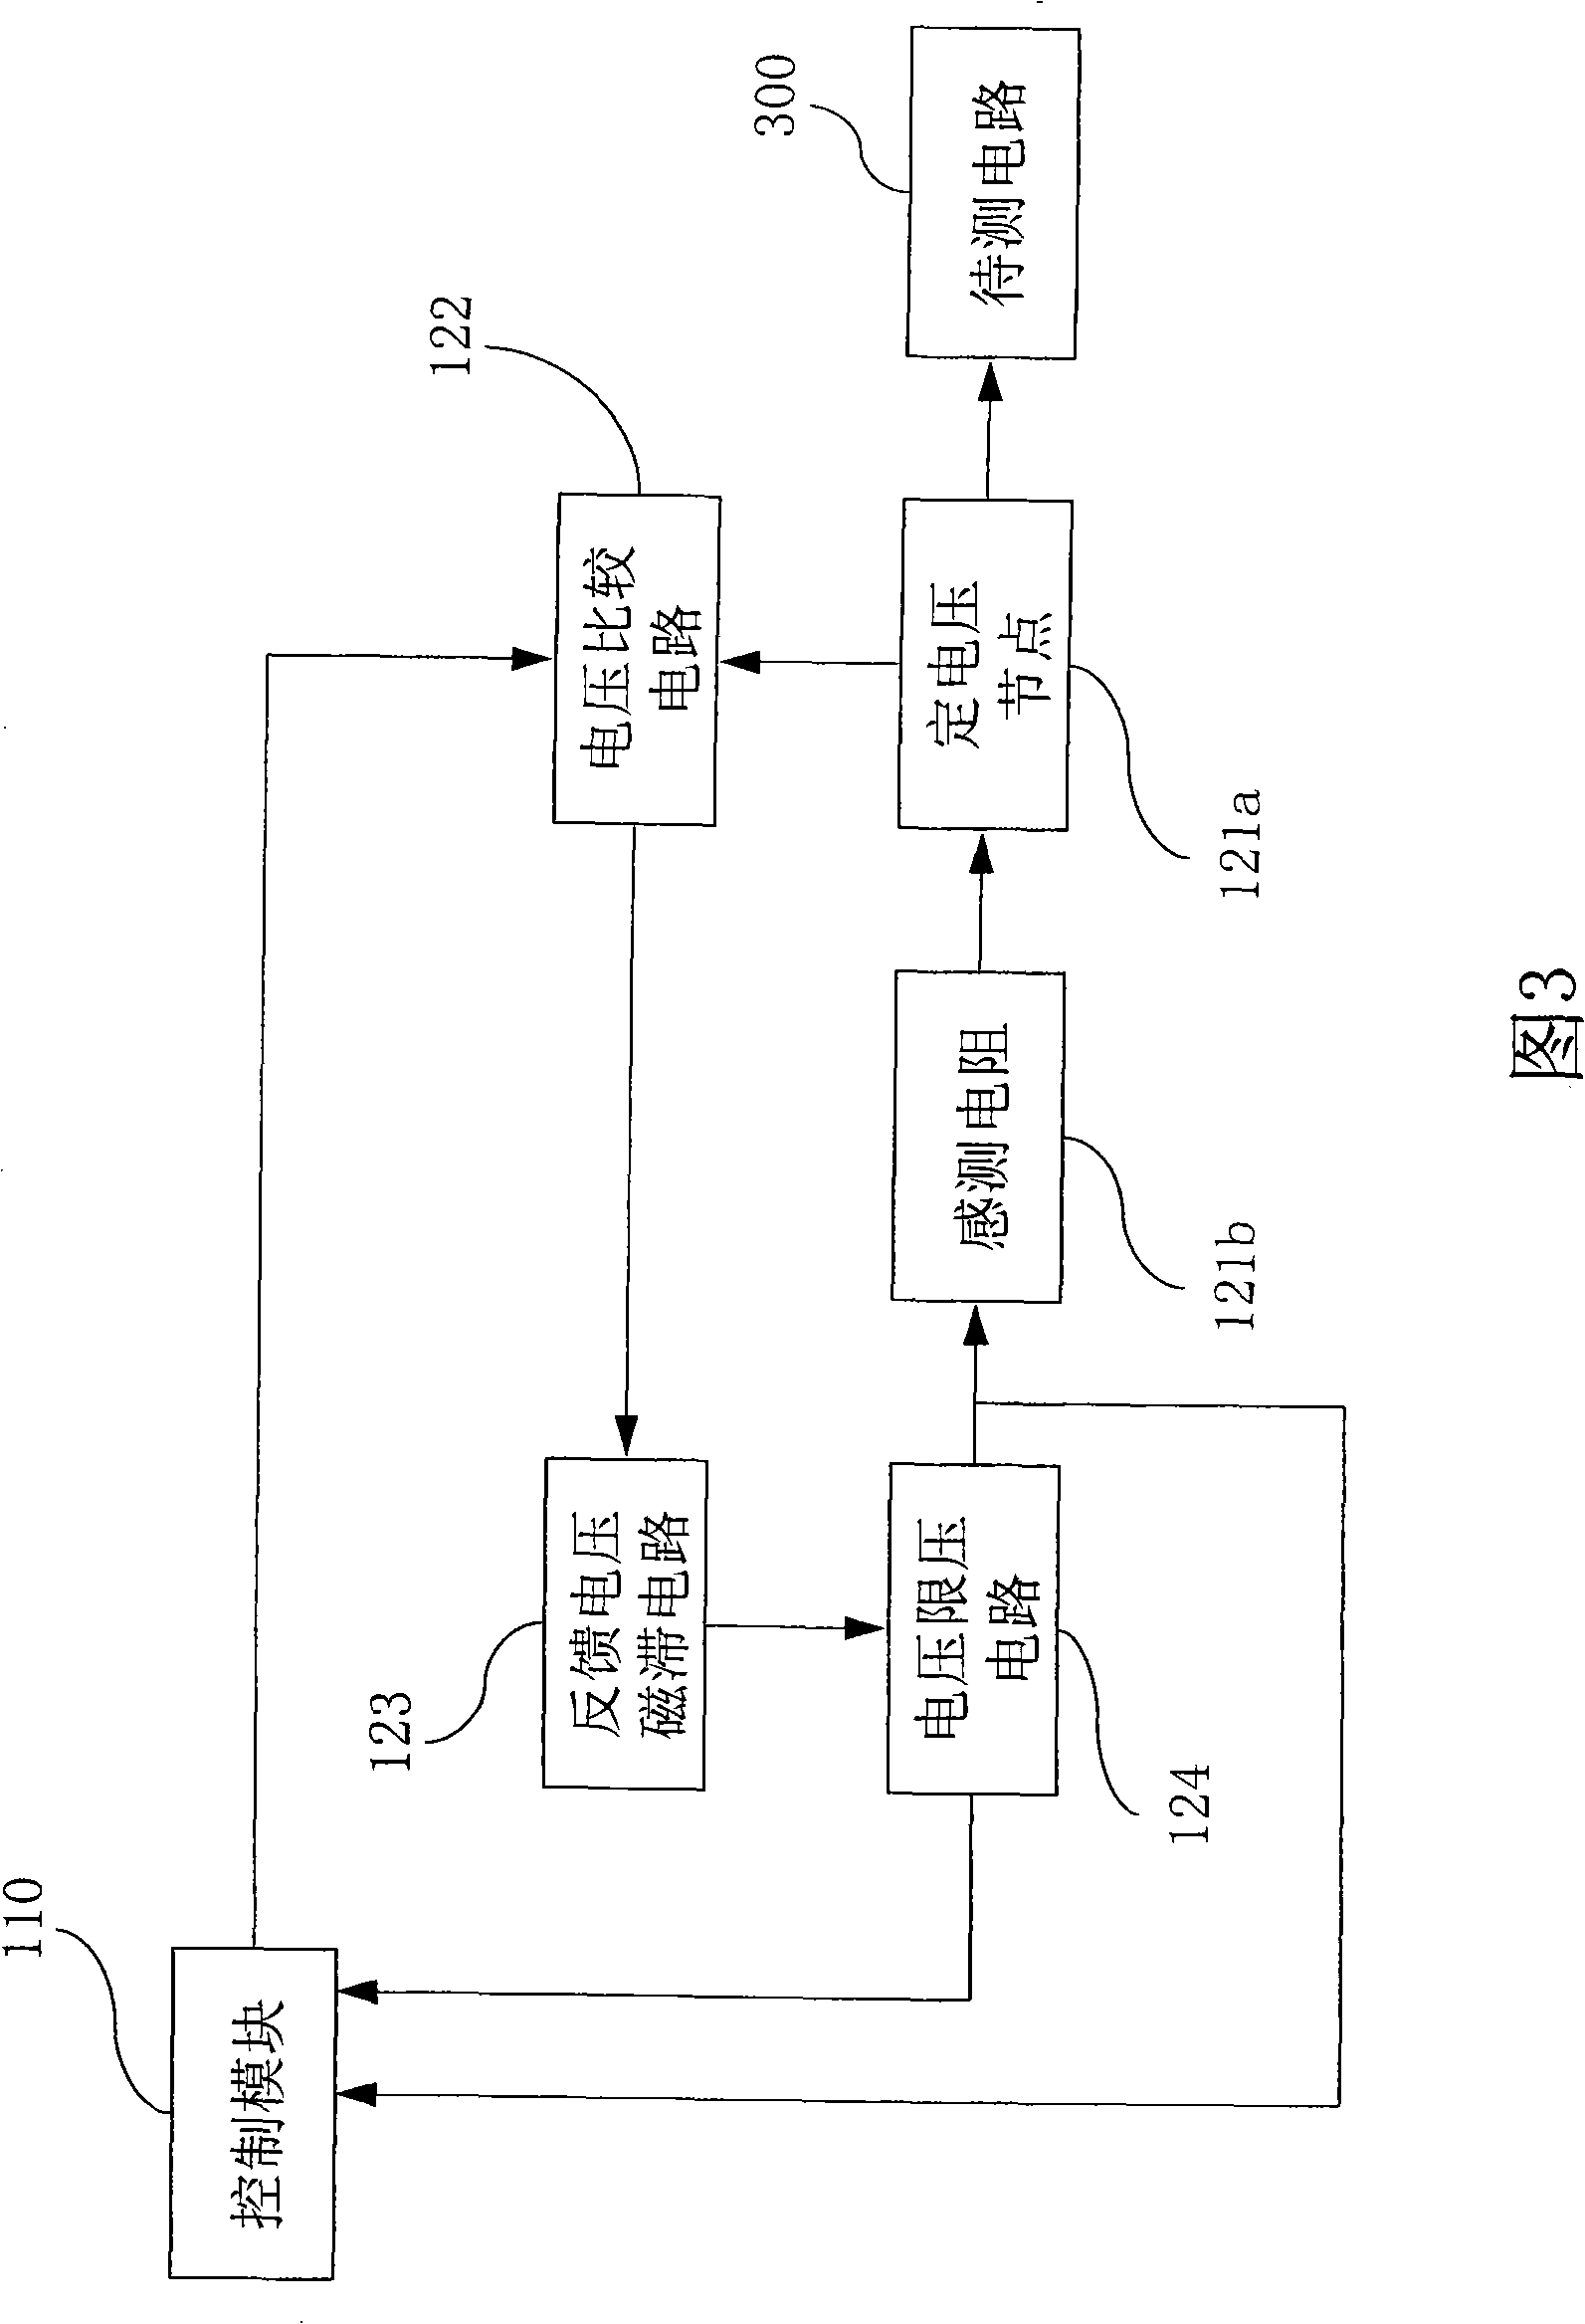 Active mode current detecting system